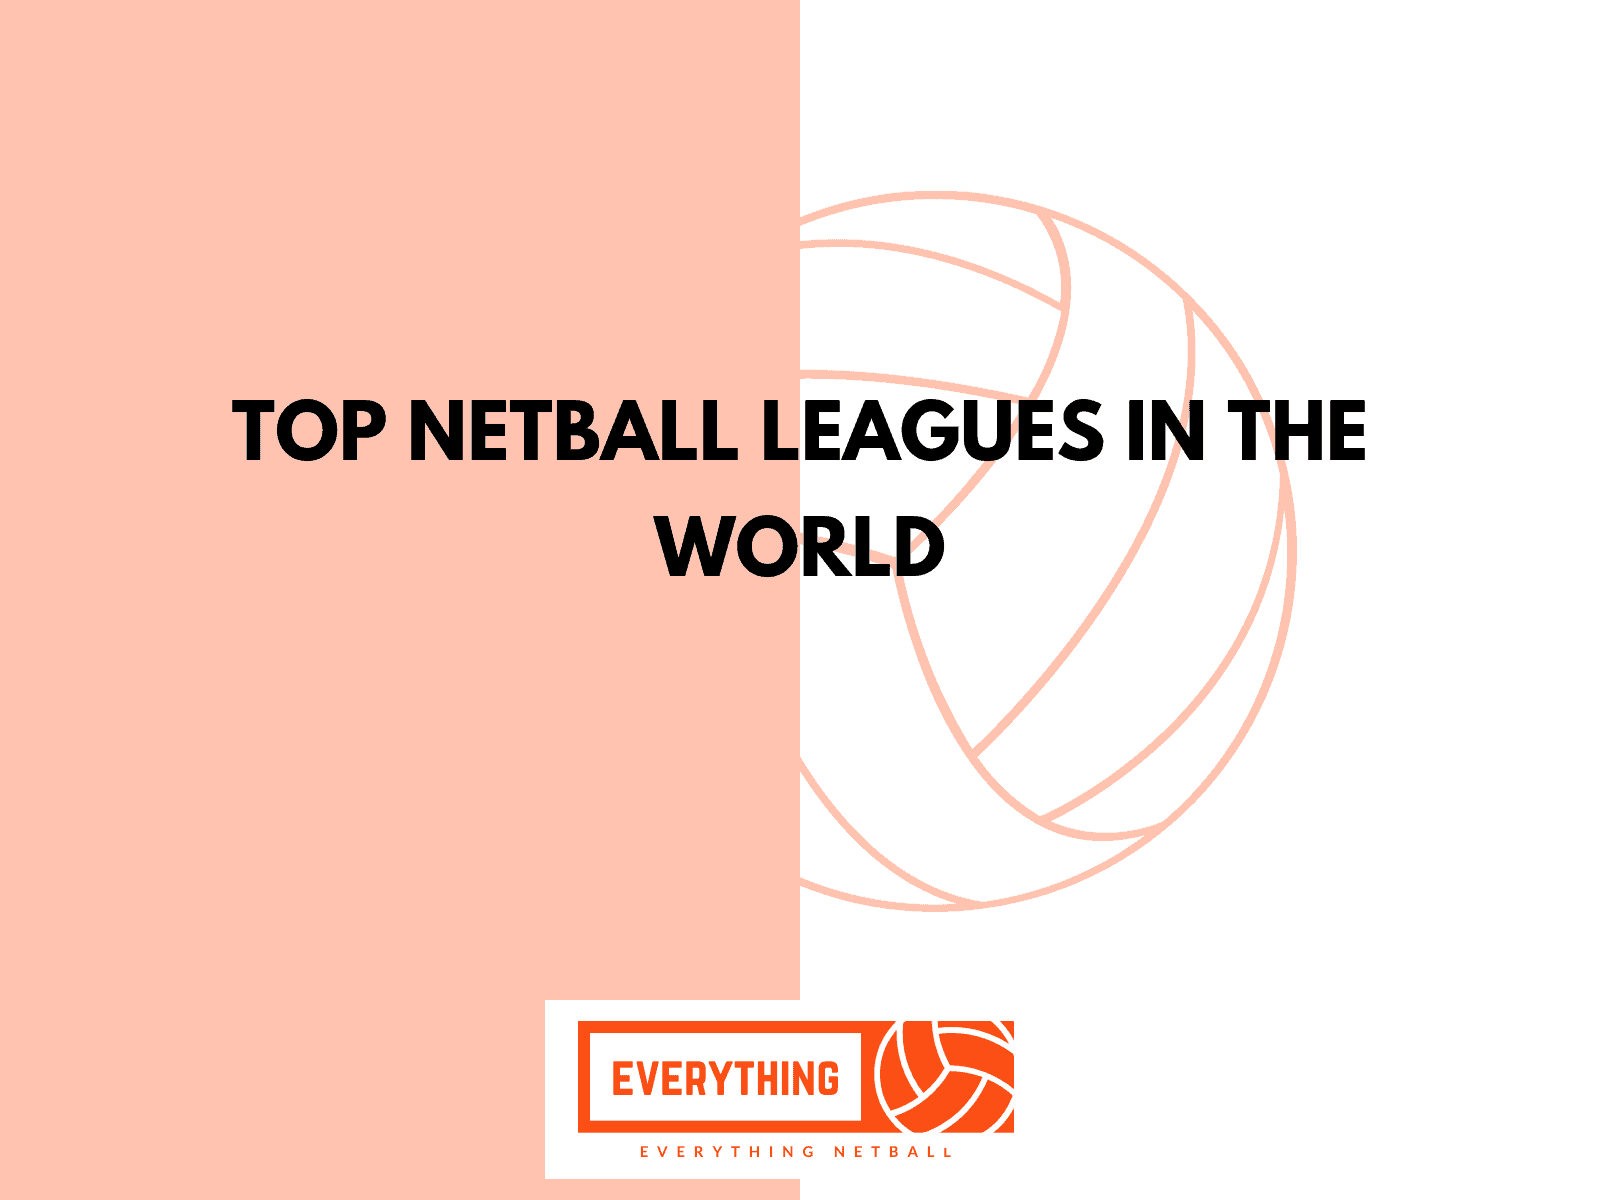 Top netball leagues in the world blog post feature image - split light orange and white background with light orange netball icon.